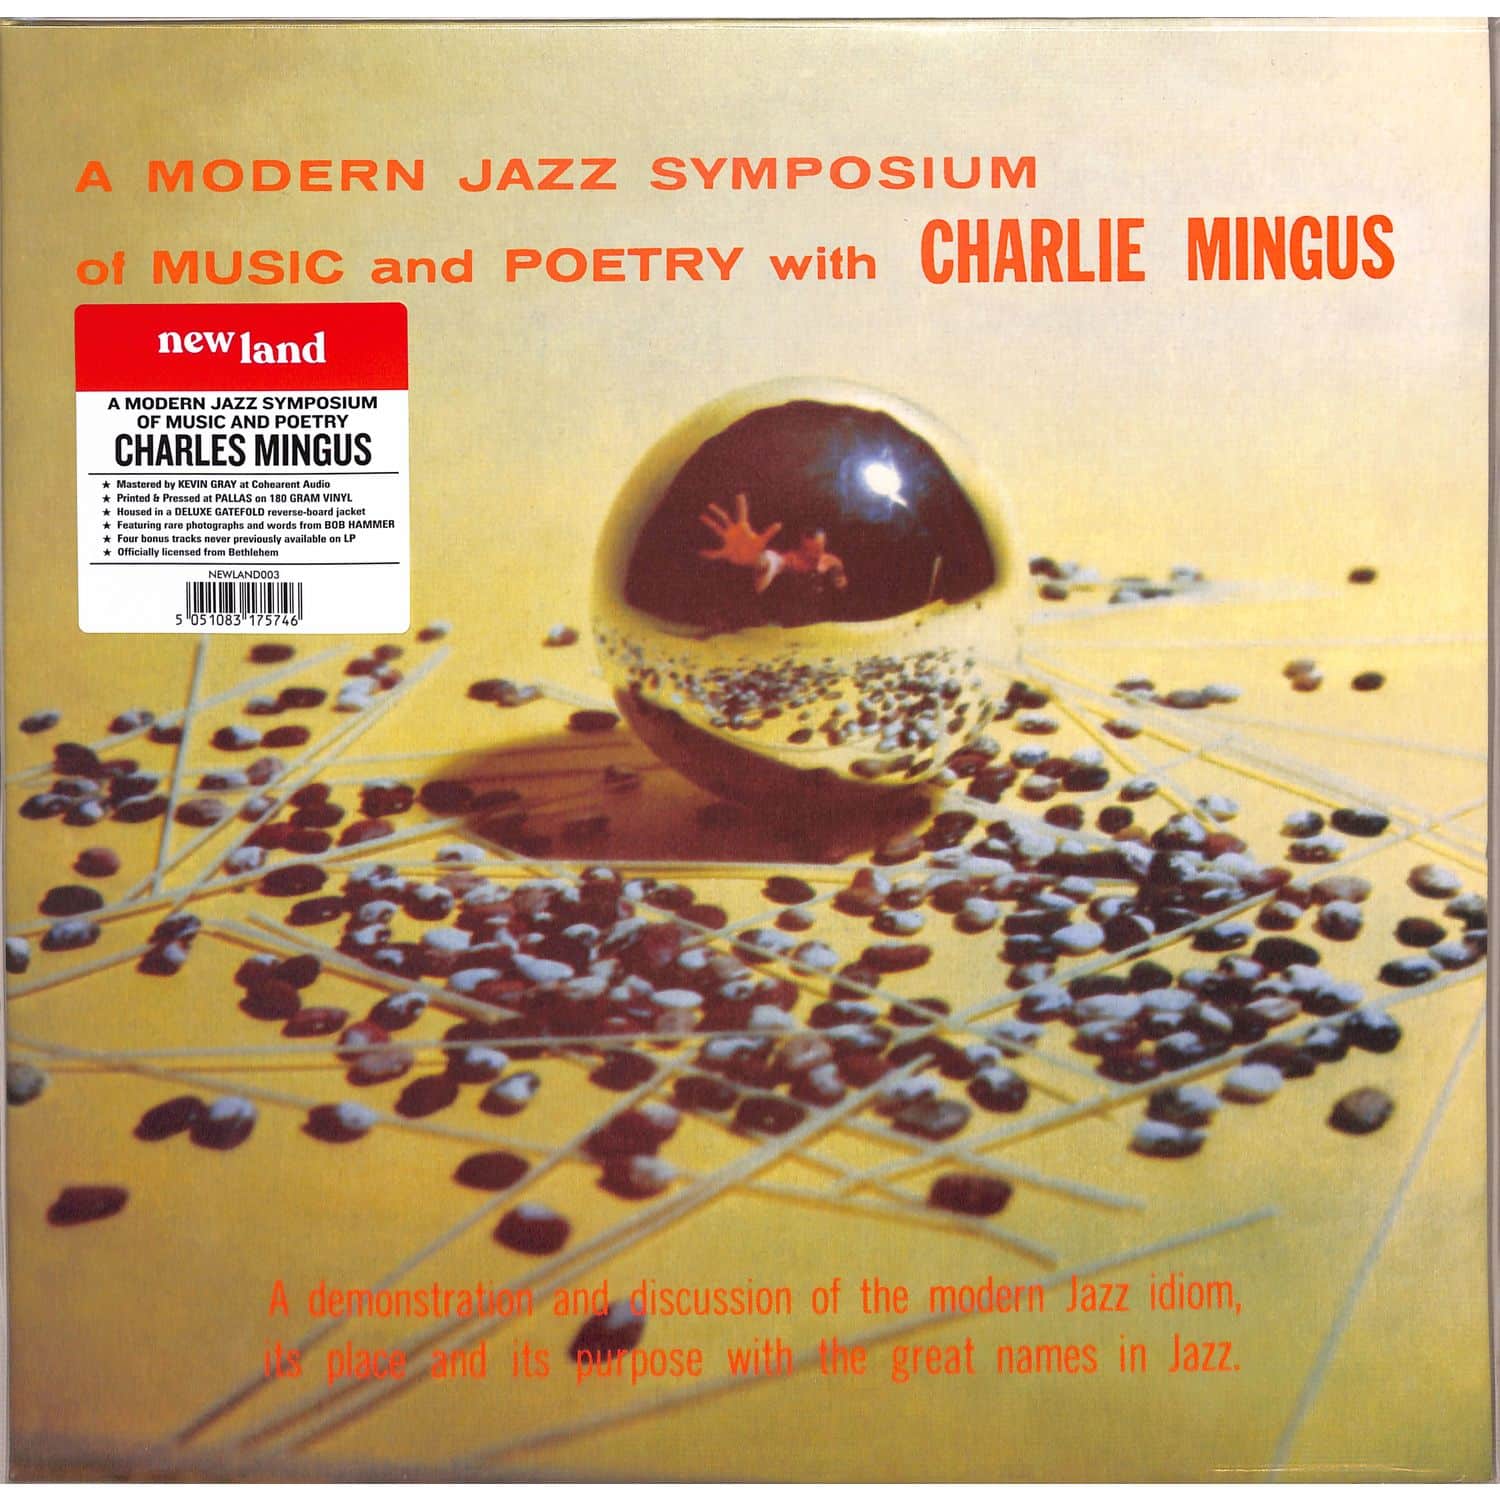 Charles Mingus - A MODERN JAZZ SYMPOSIUM OF MUSIC AND POETRY 